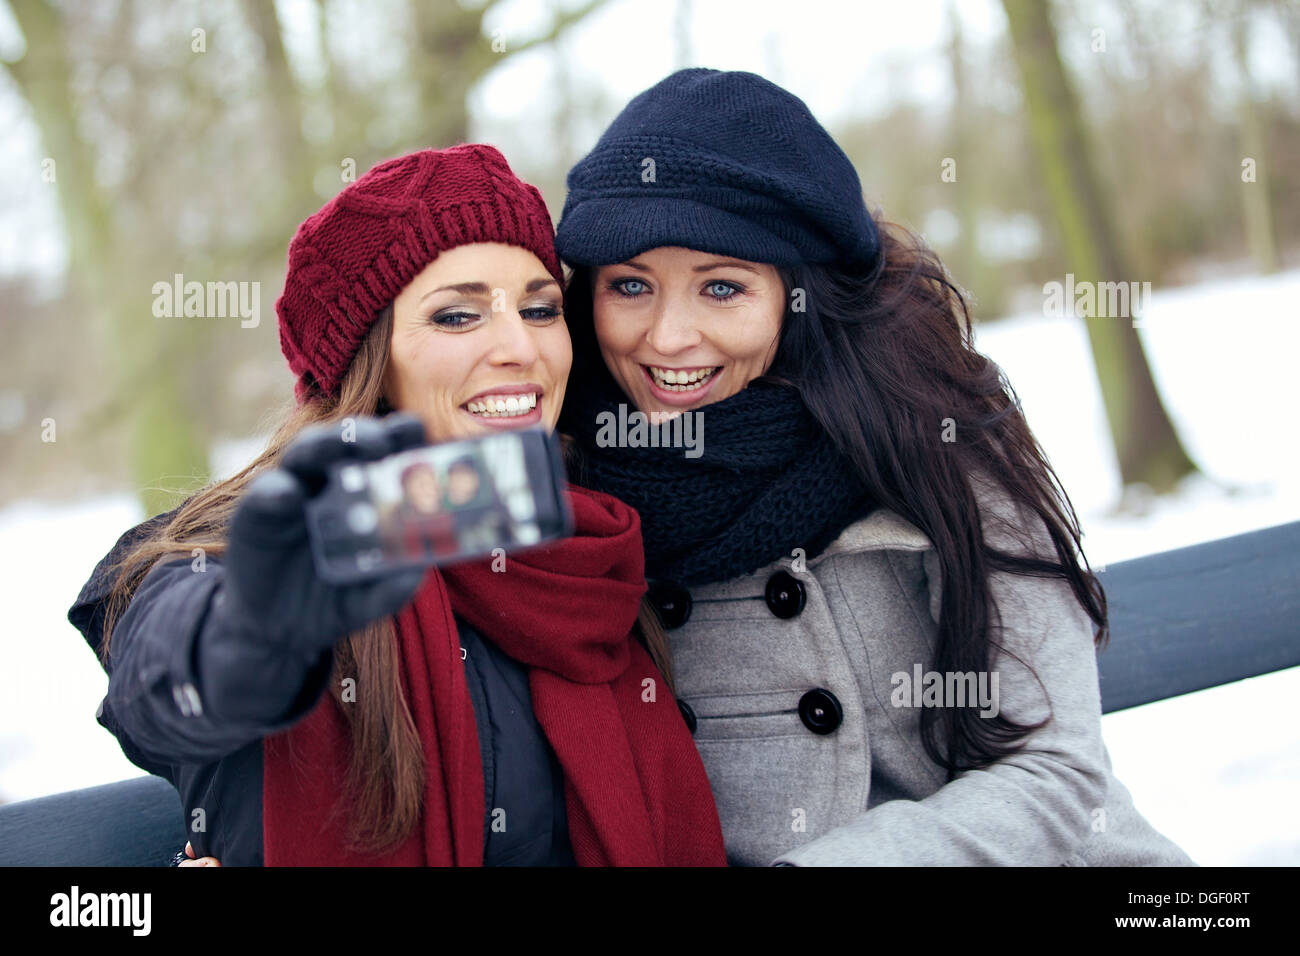 Two beautiful women enjoying the freezing park and taking pictures Stock Photo